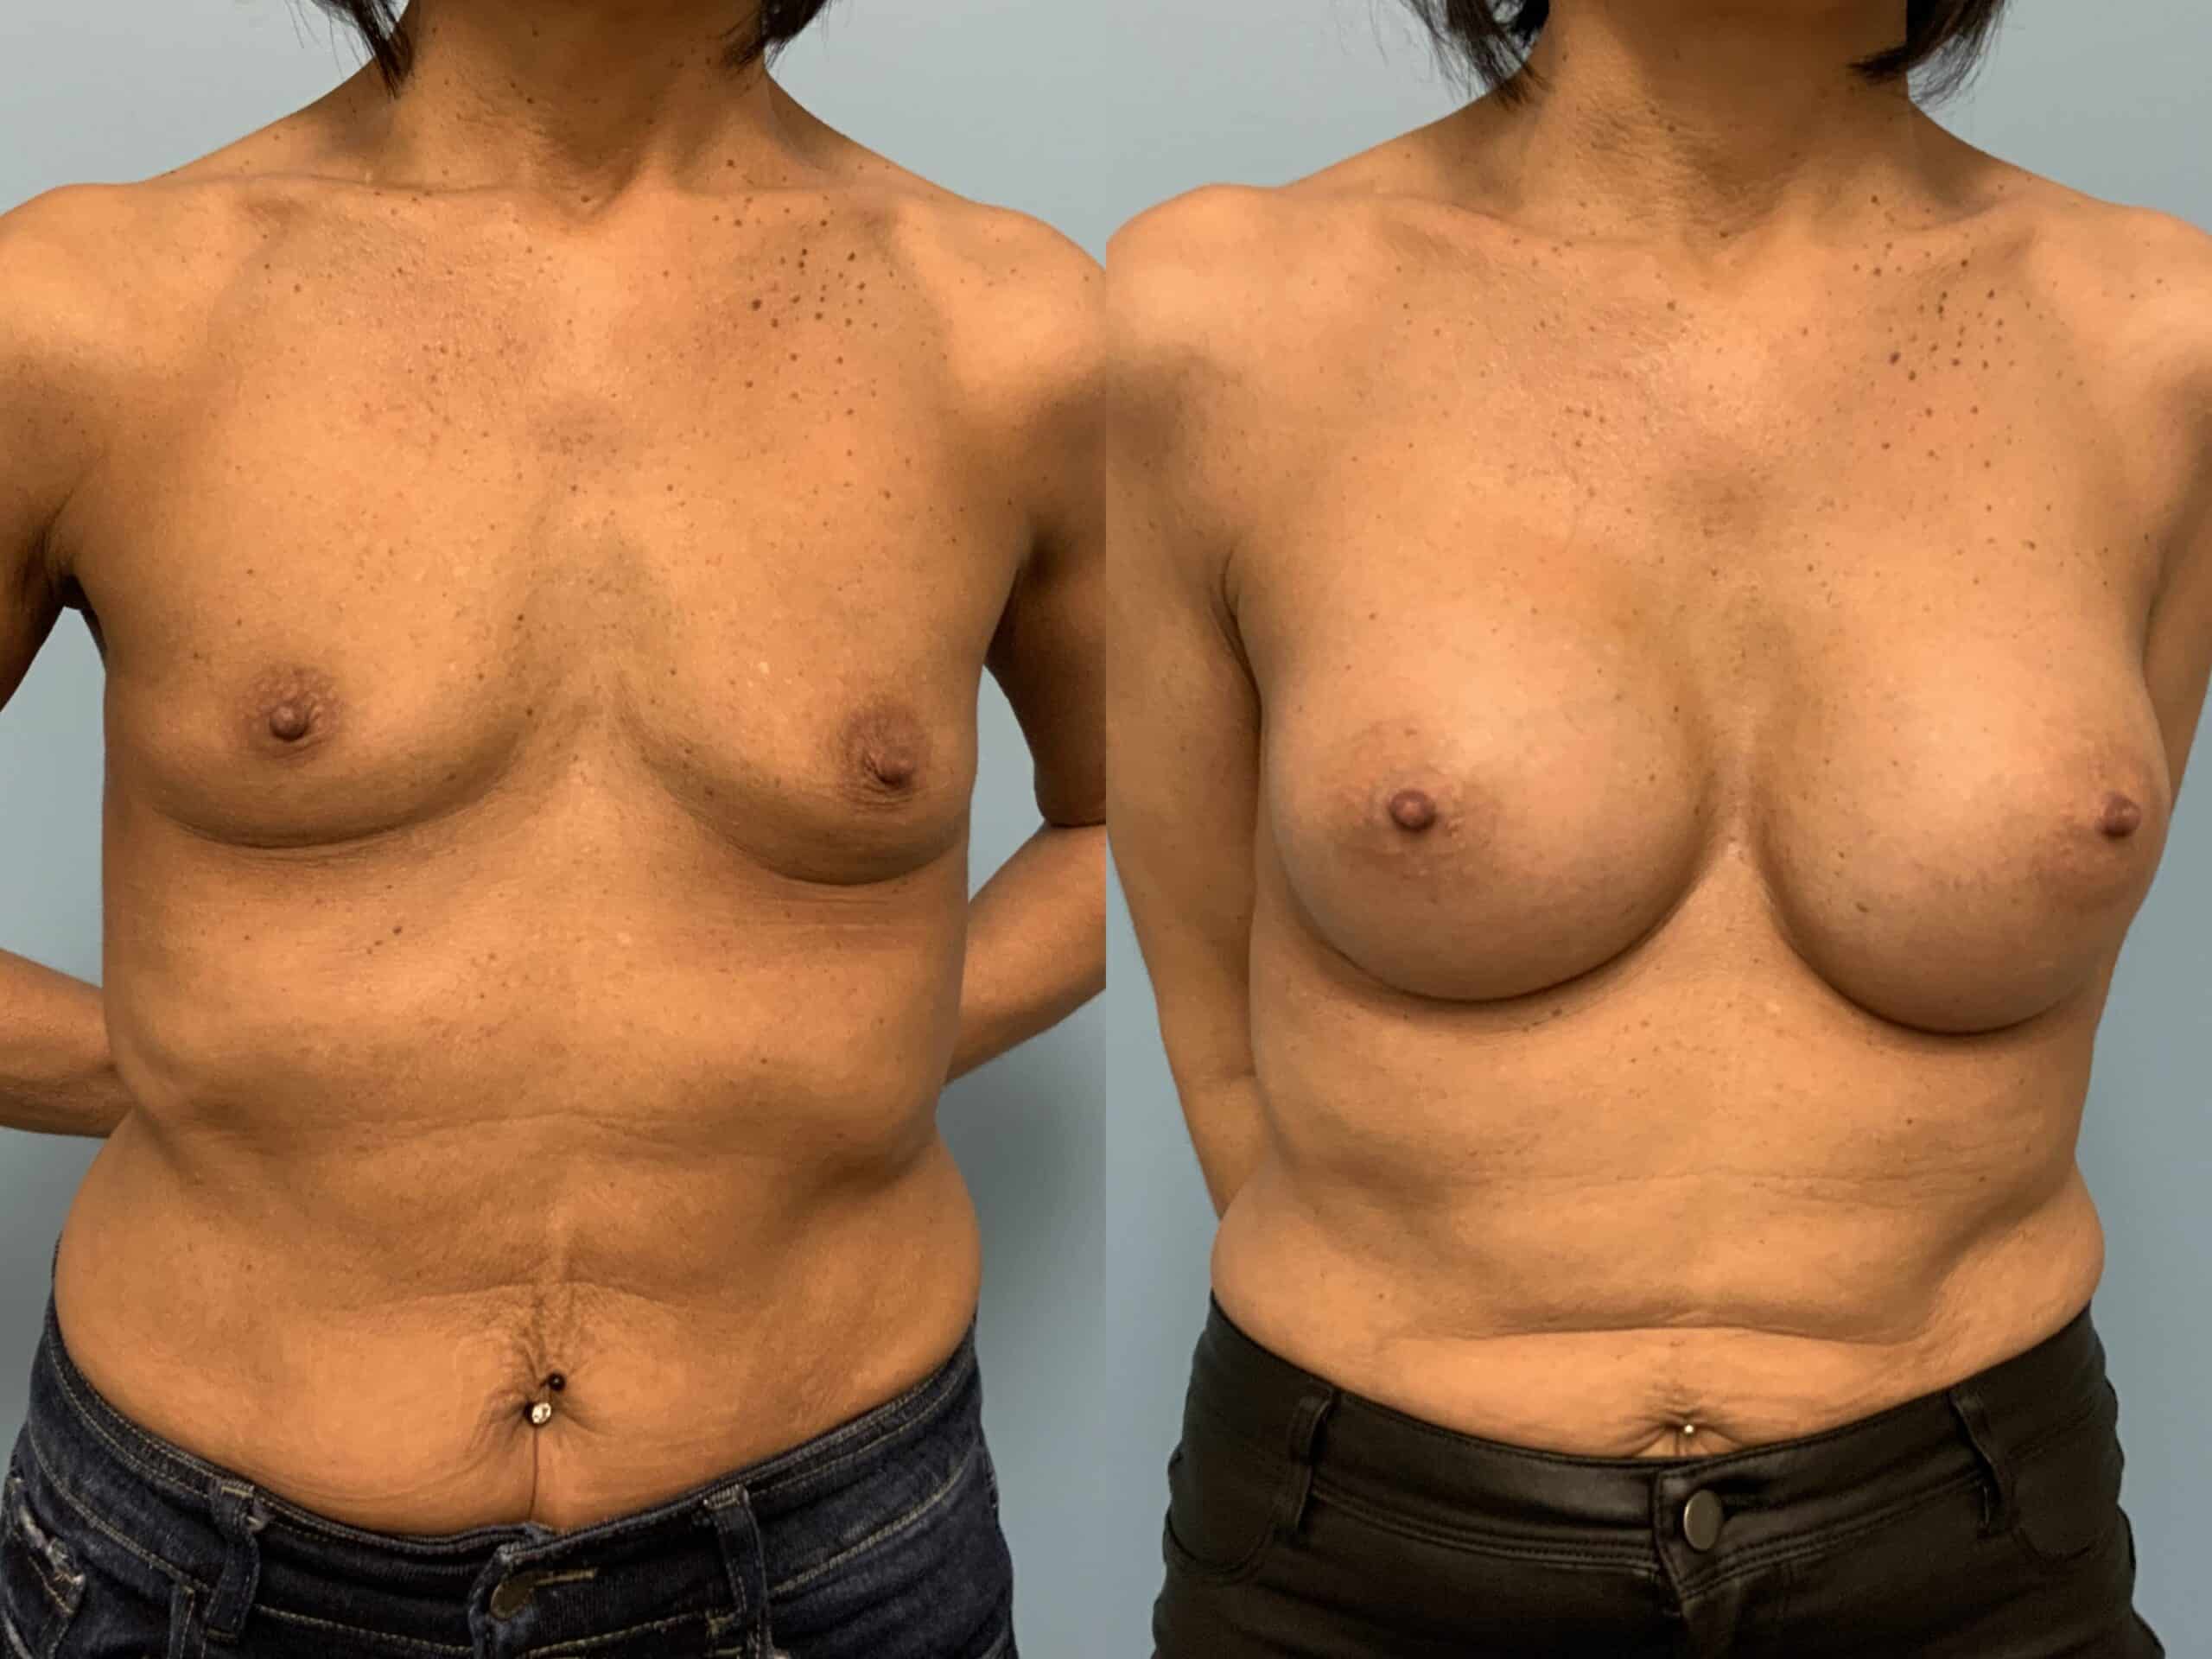 Before and after, Patient 2 mo post op from Breast augmentation, Level III Muscle Release procedure performed by Dr. Paul Vanek